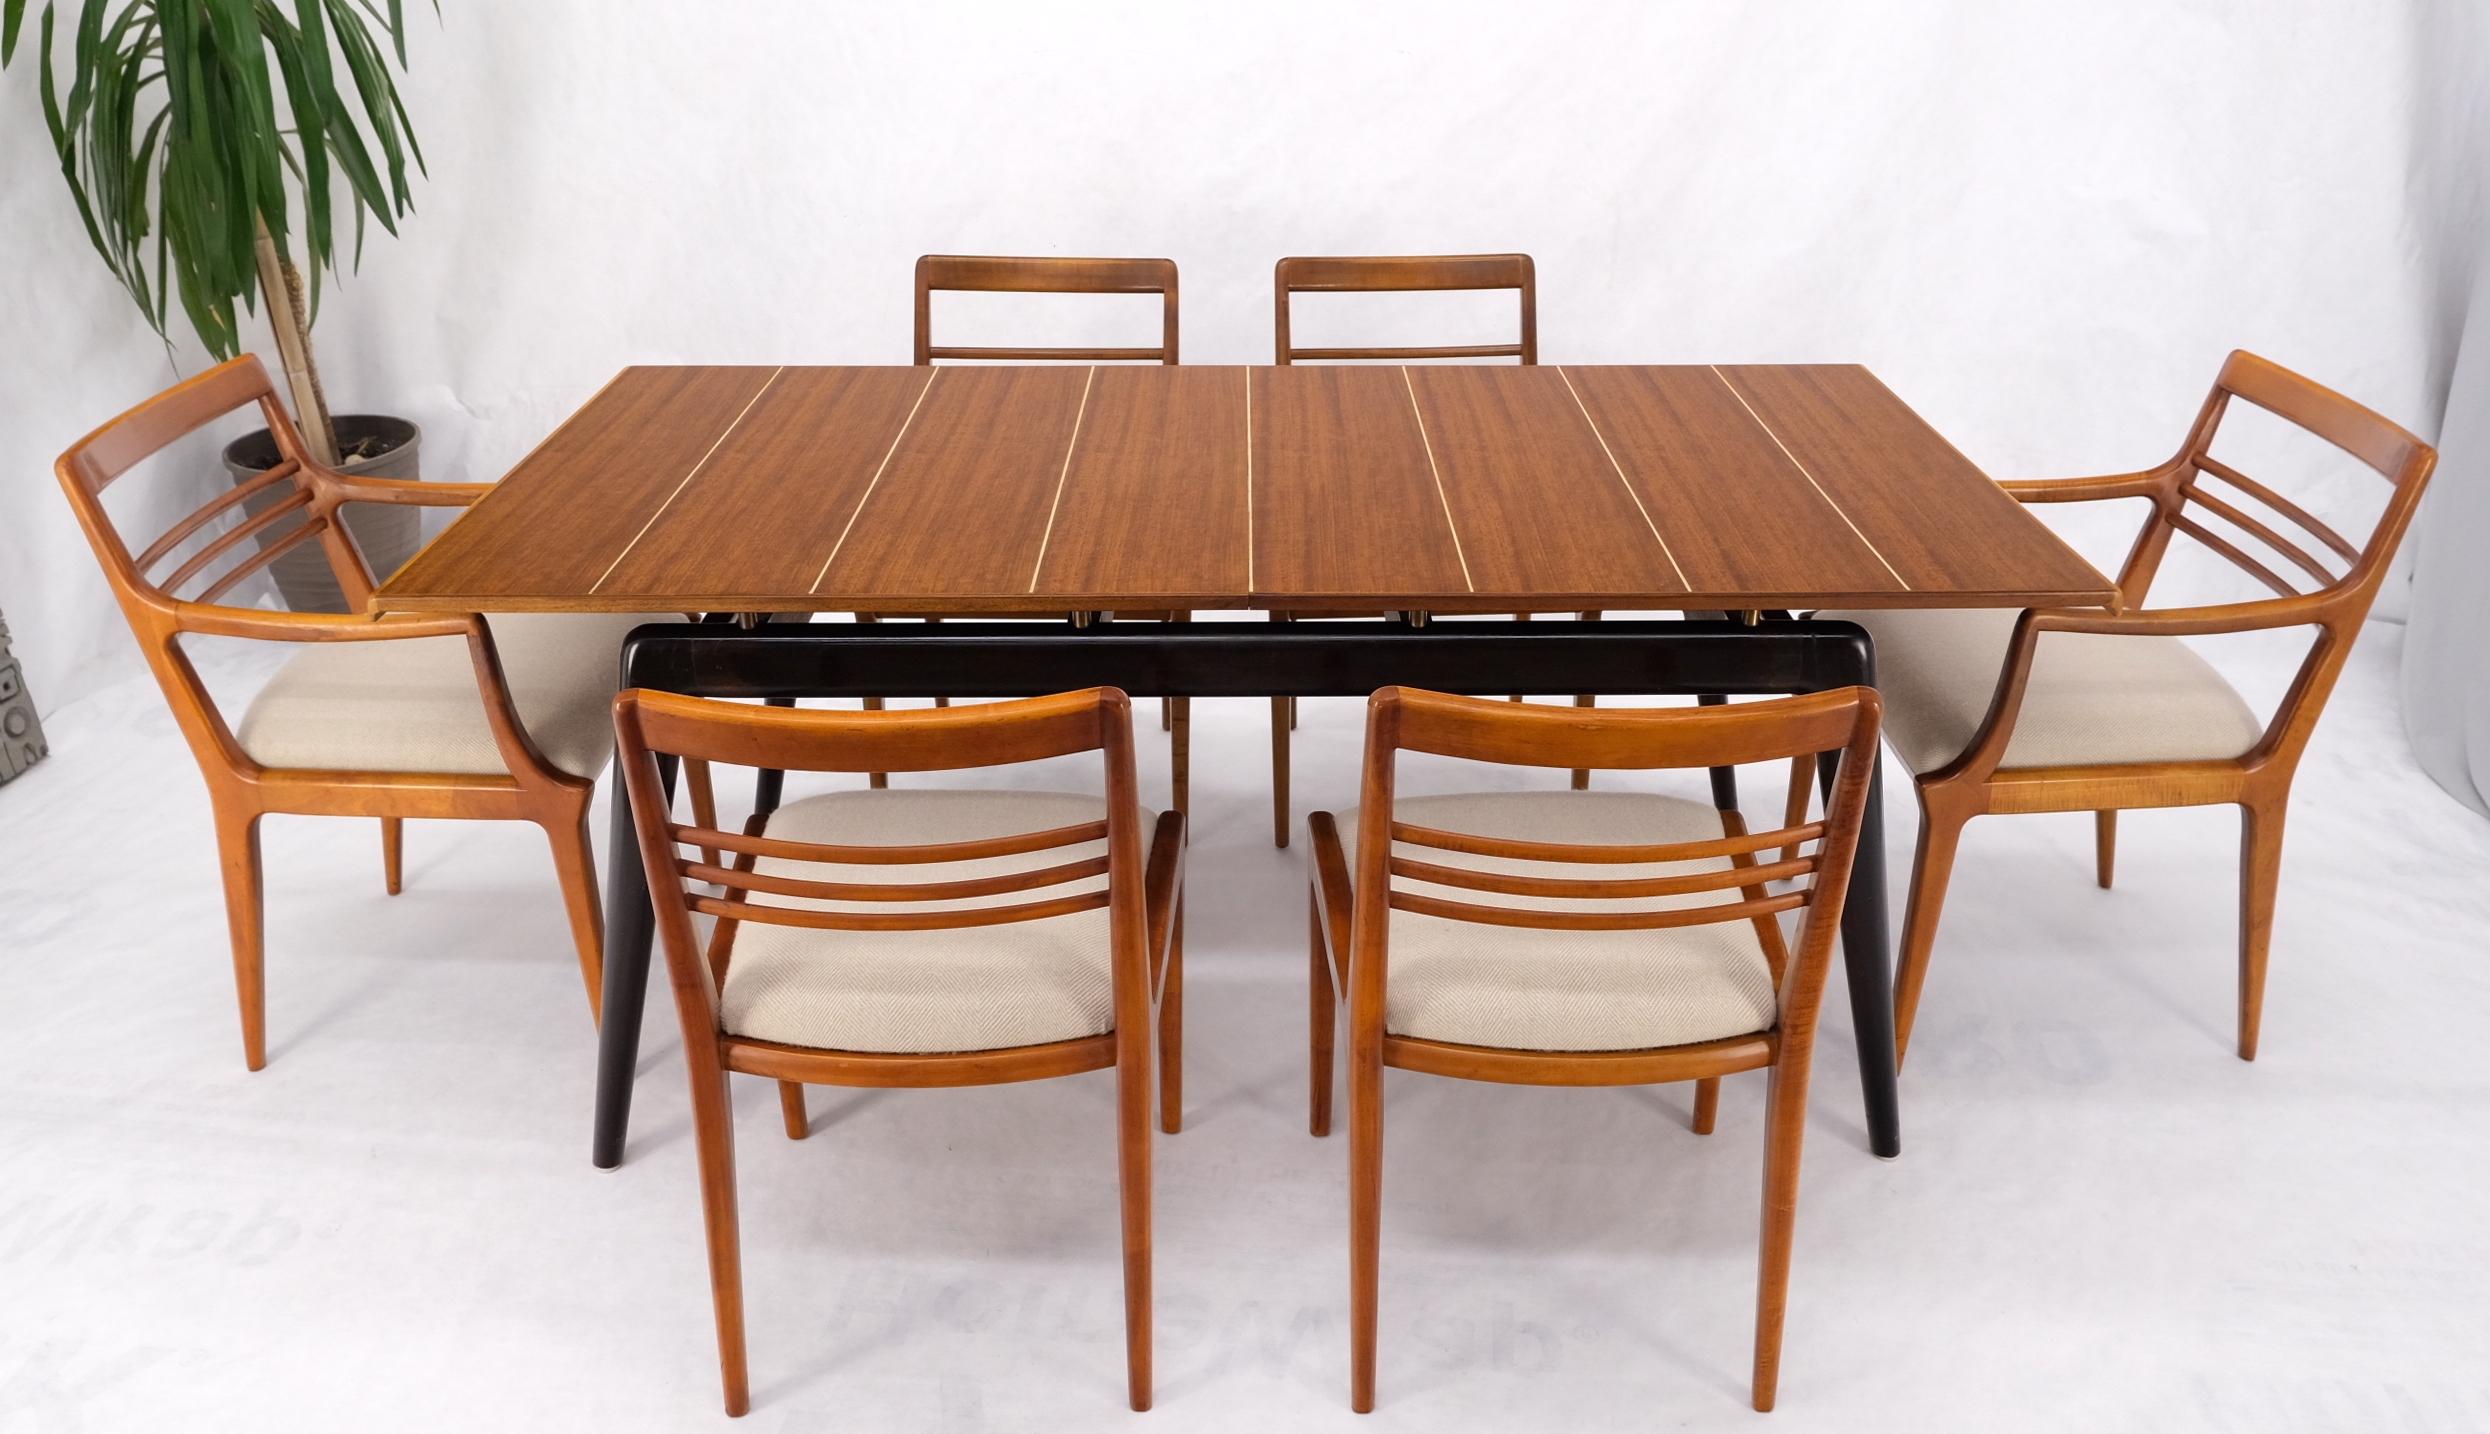 Italian Mid-Century Modern Dining Table 8 Chairs Set New Linen Upholstery Seats For Sale 6